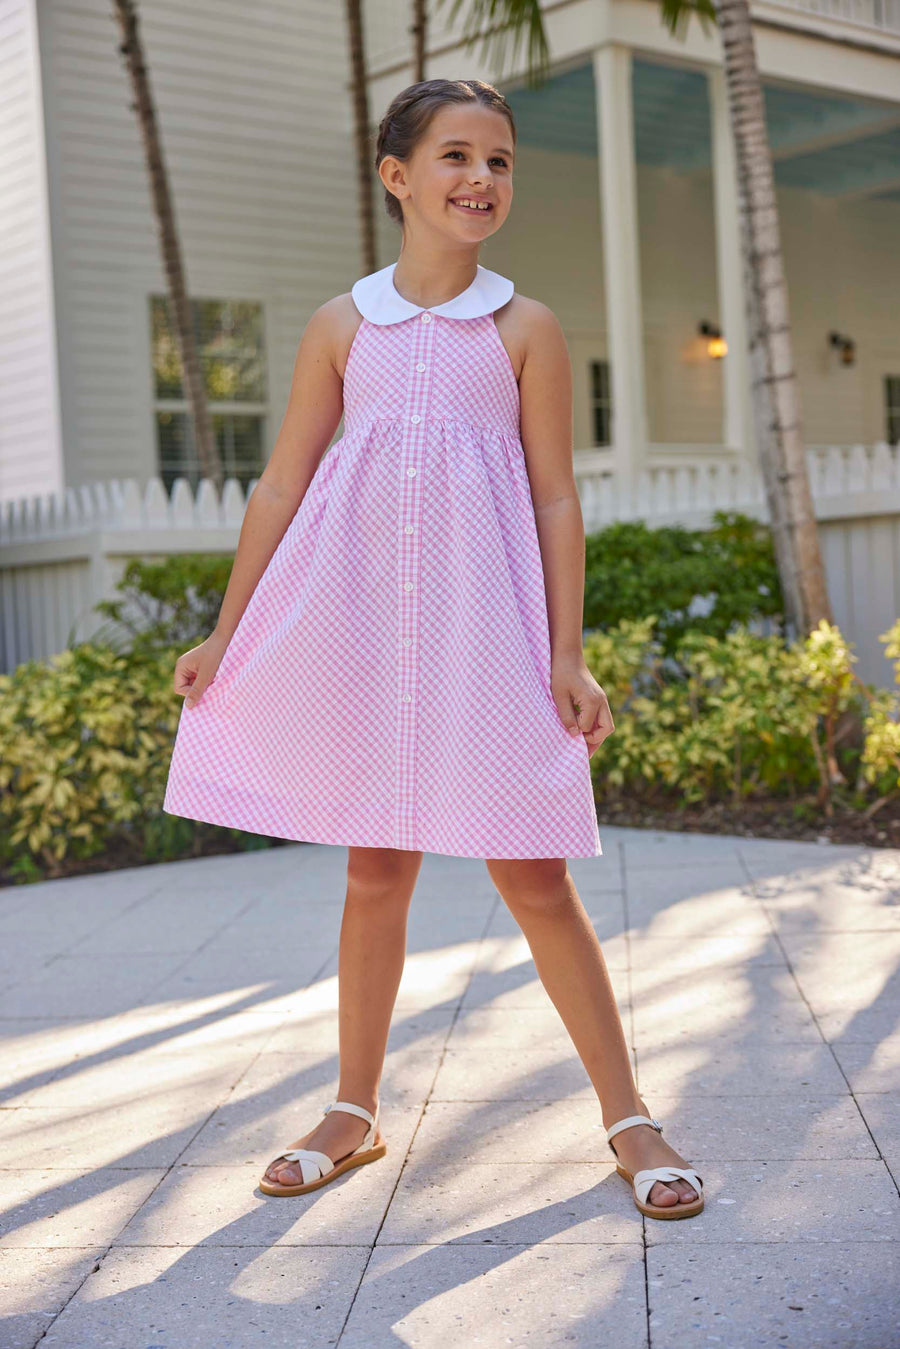 classic childrens clothing girls pink gingham halter dress with white collar